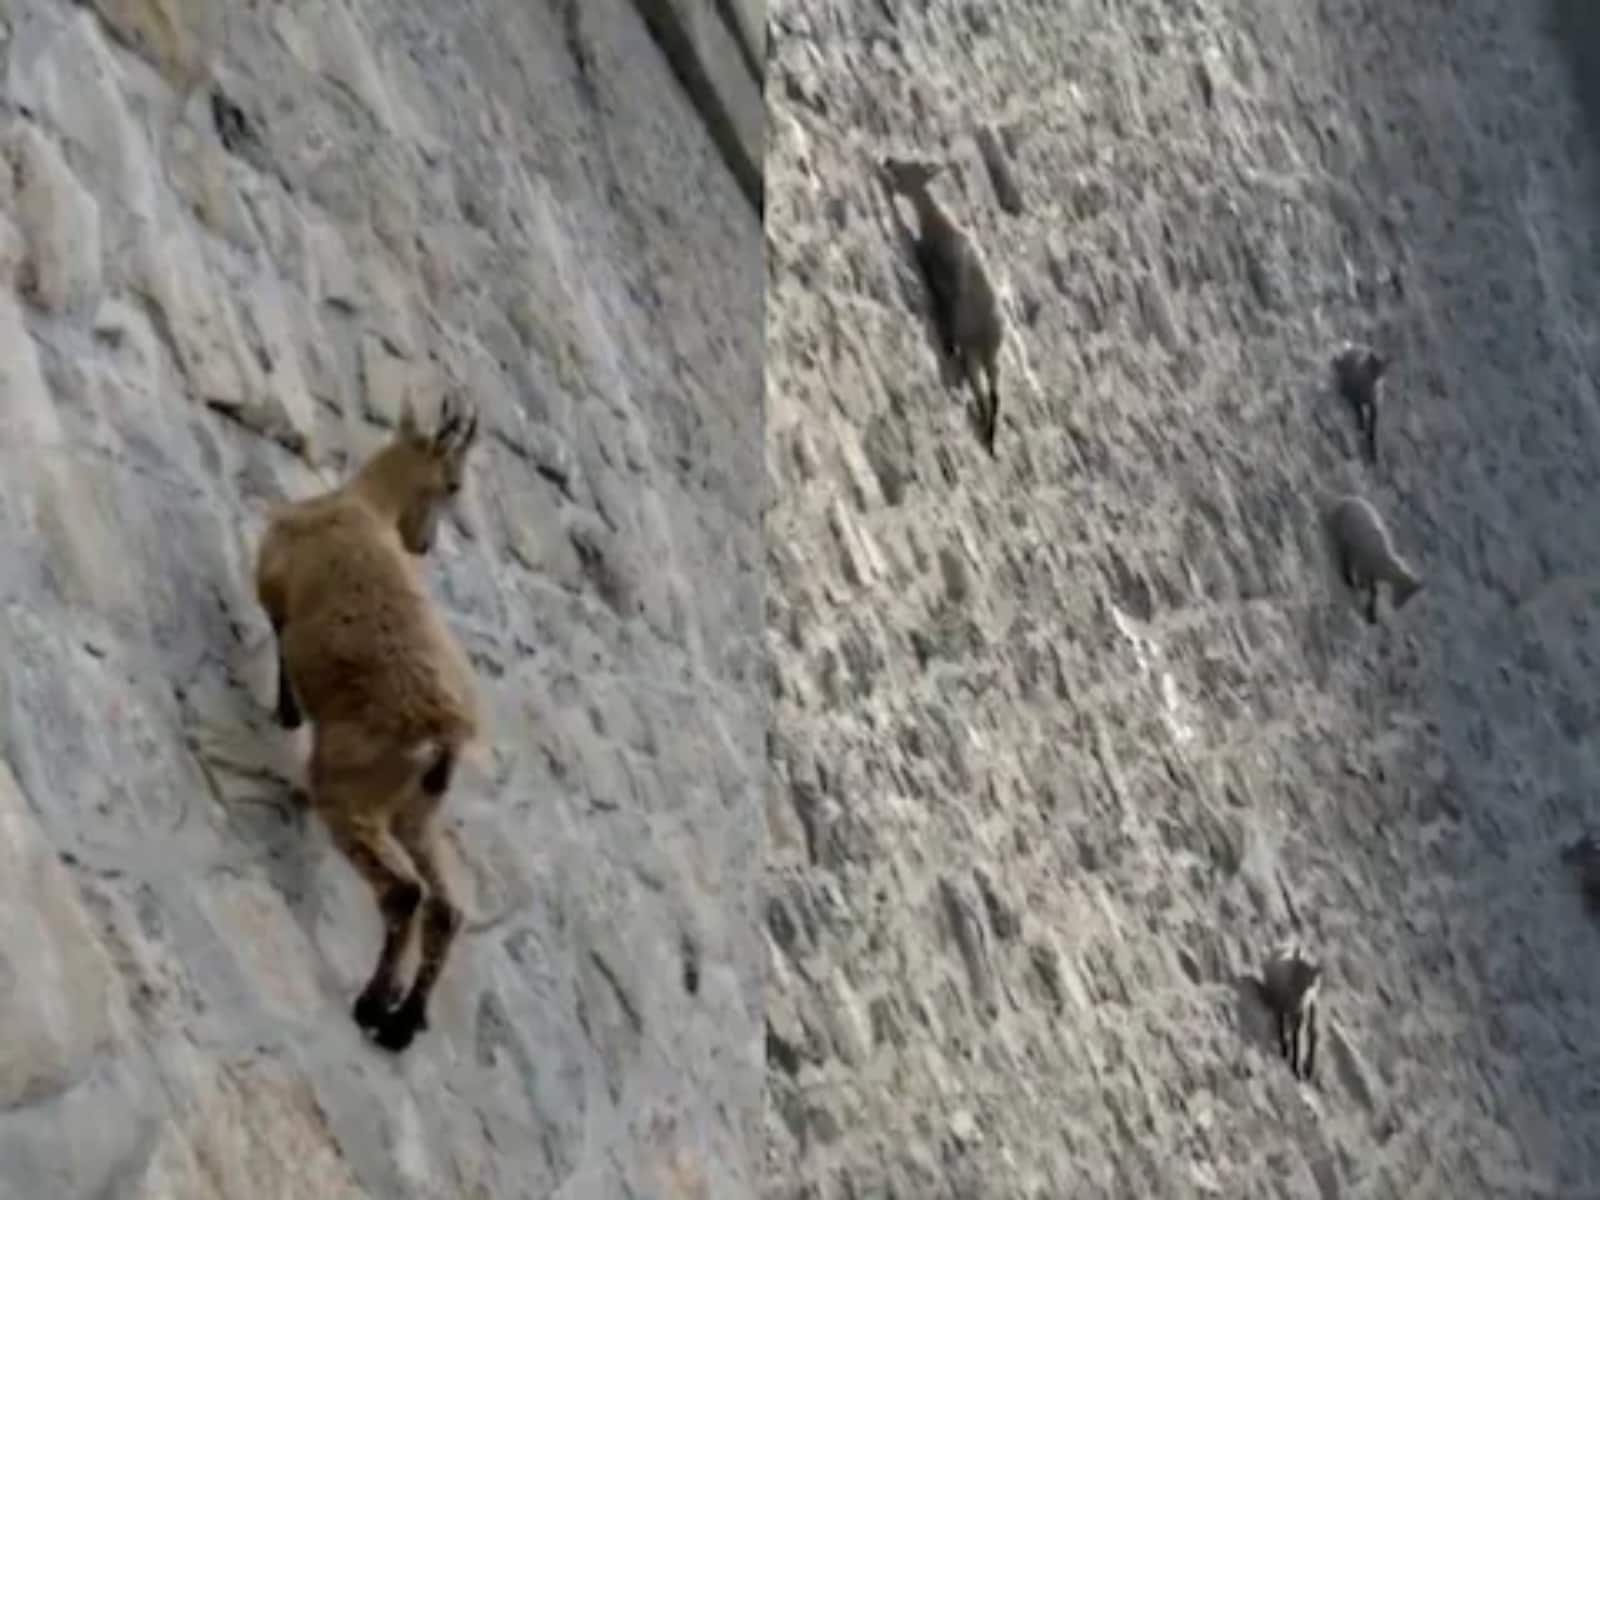 Mountain Goats Climbing A Dam Wall Challenges Newton's Rule Of Gravity